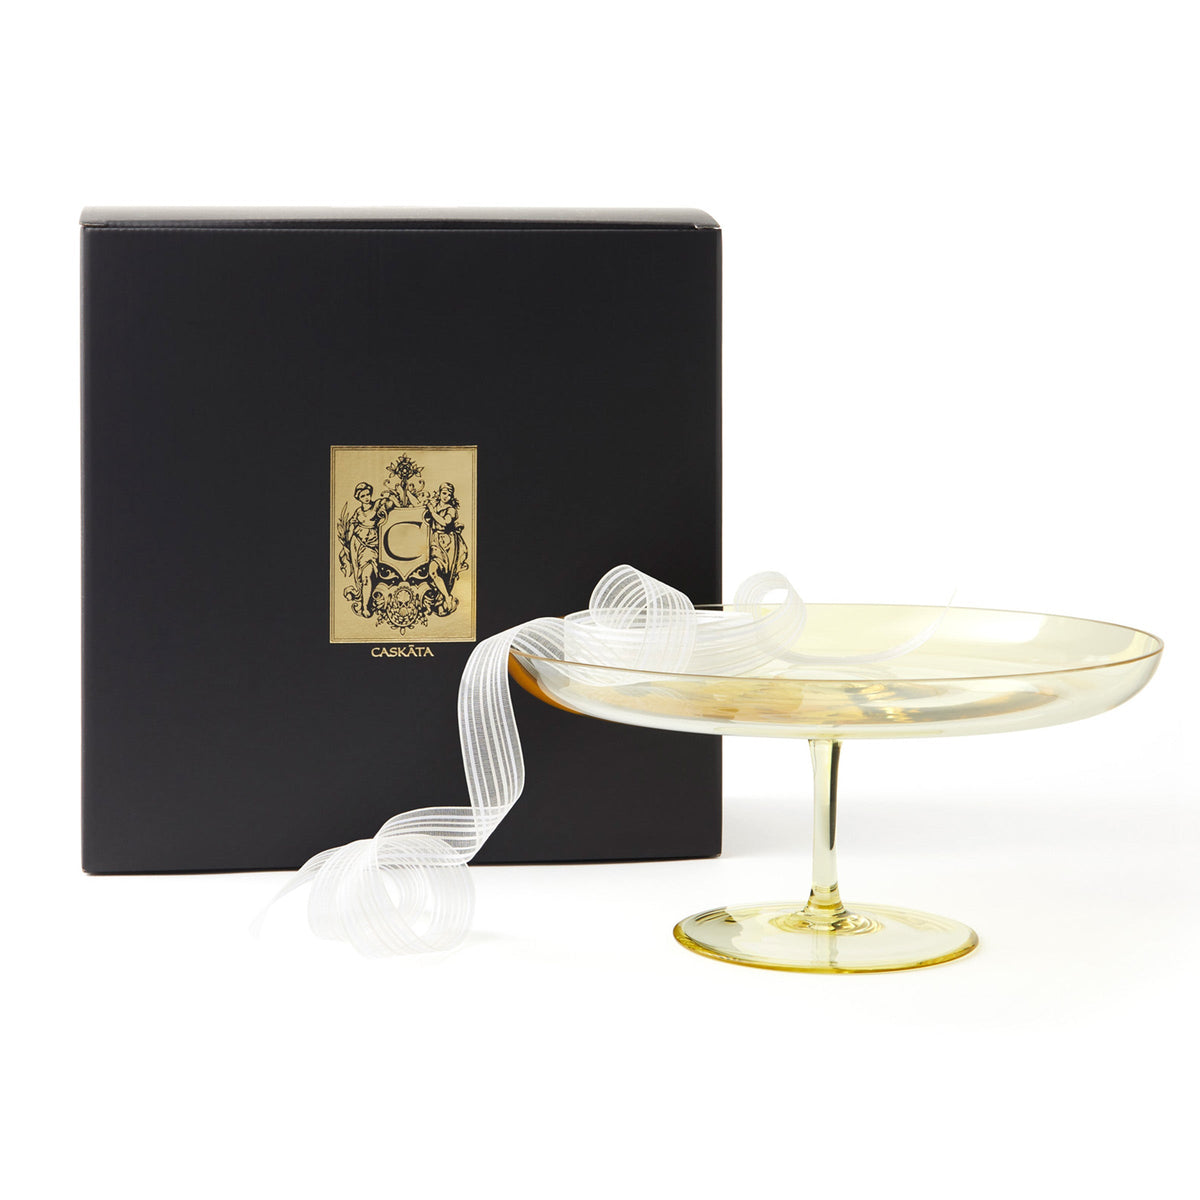 The Caskata Celia Citrine Cake Pedestal is perfect for displaying your delicious creations. This gold cake stand comes with a ribbon and box, adding an extra touch of glamour reminiscent of glamorous New York City.